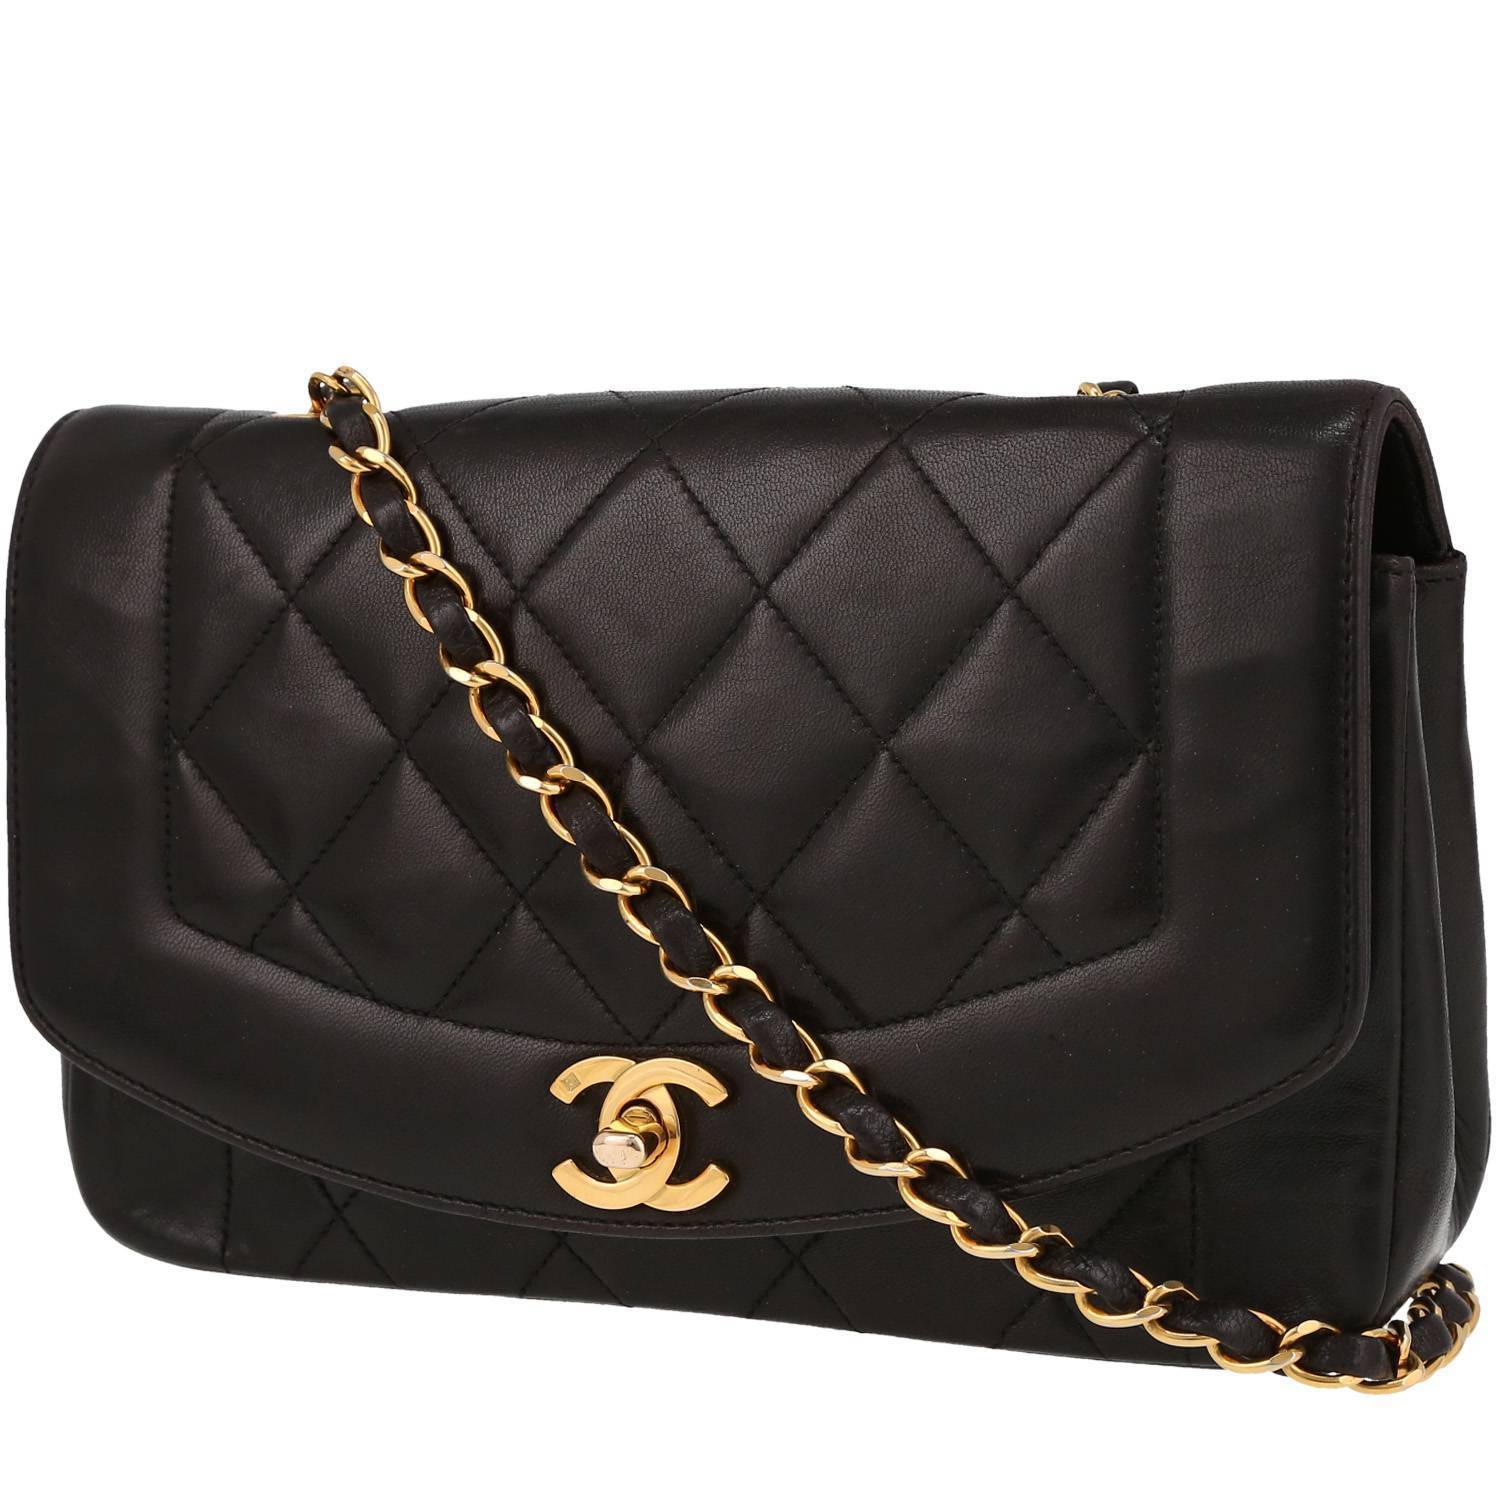 HealthdesignShops, Sac bandoulière nothing Chanel Diana 403076 d'occasion